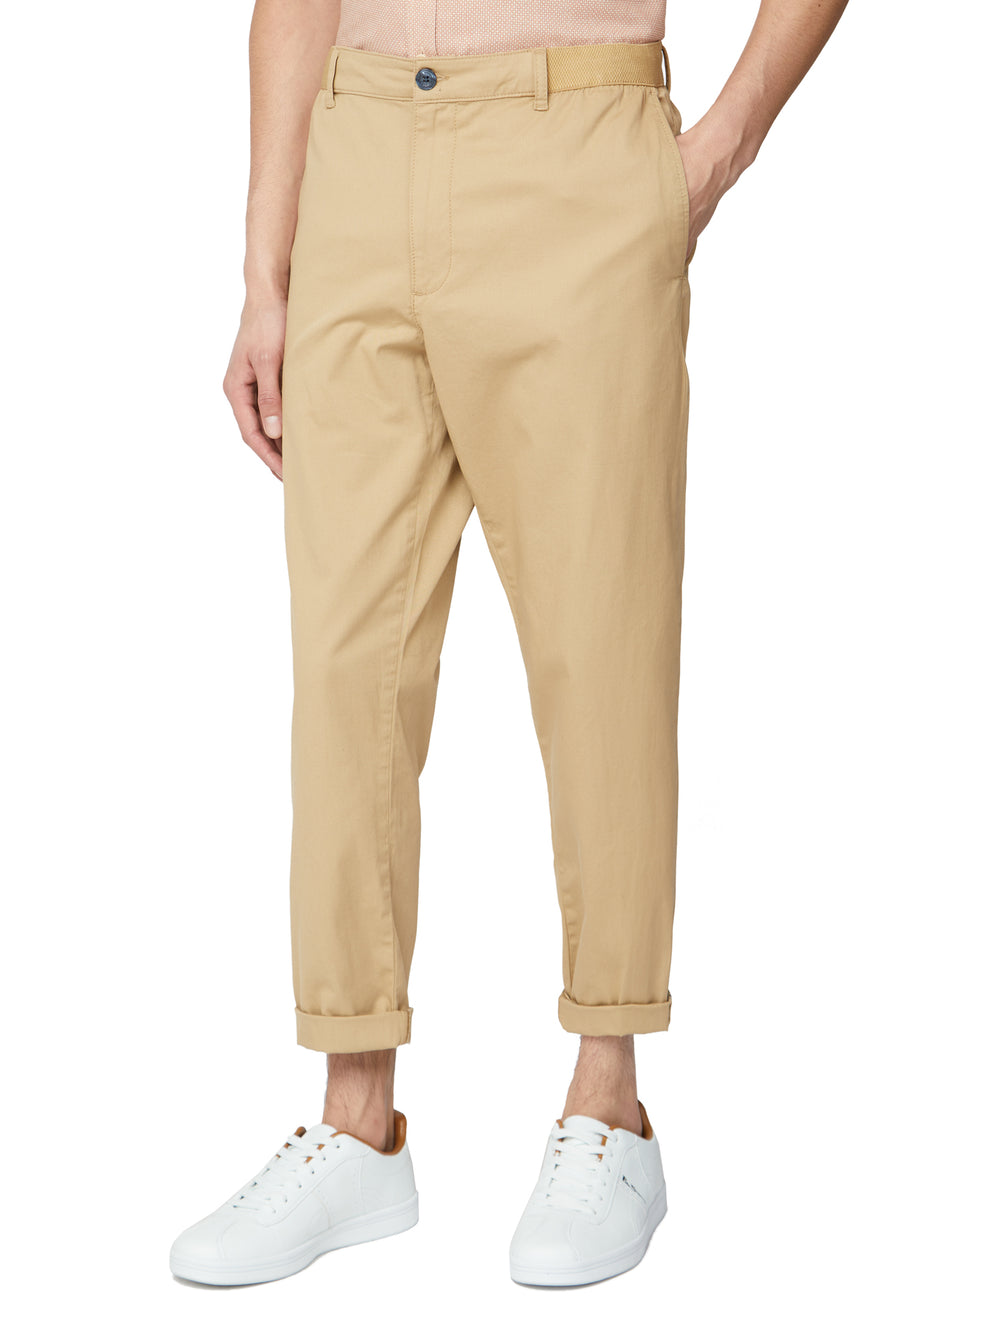 Relaxed Trouser - Sand